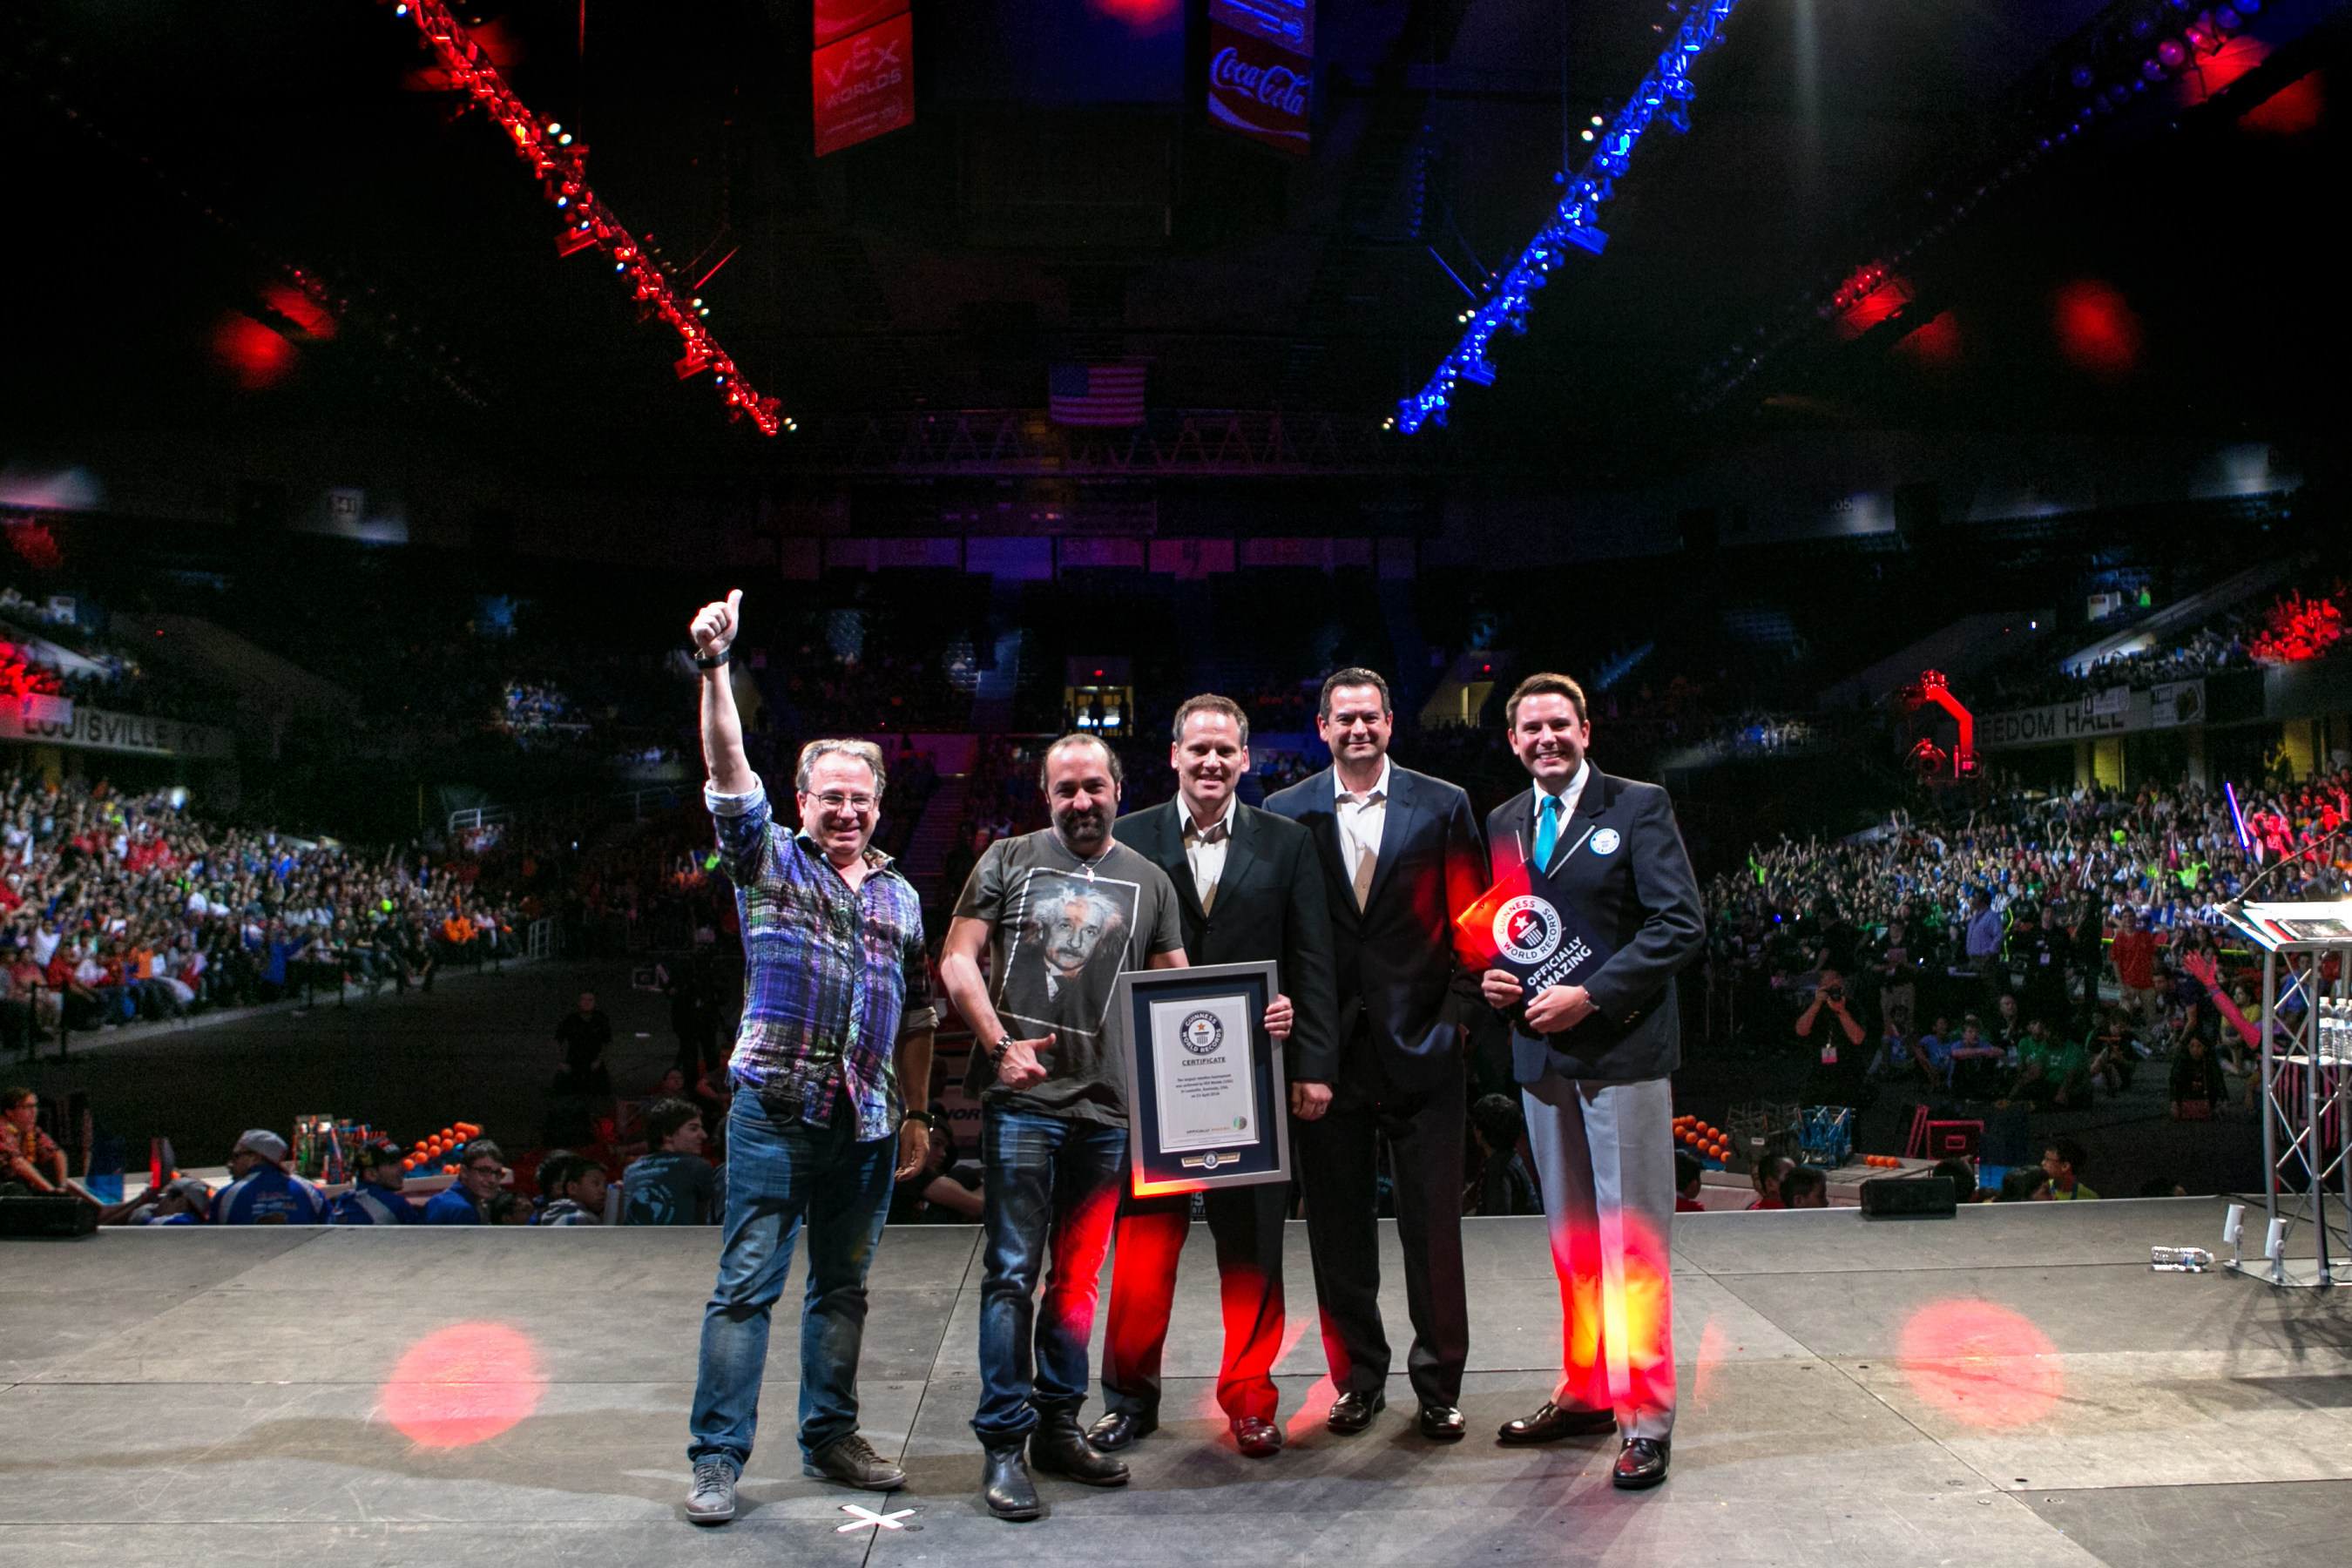 GUINNESS WORLD RECORDS(TM) title achieved at VEX Worlds for the largest student-led robotics competition!